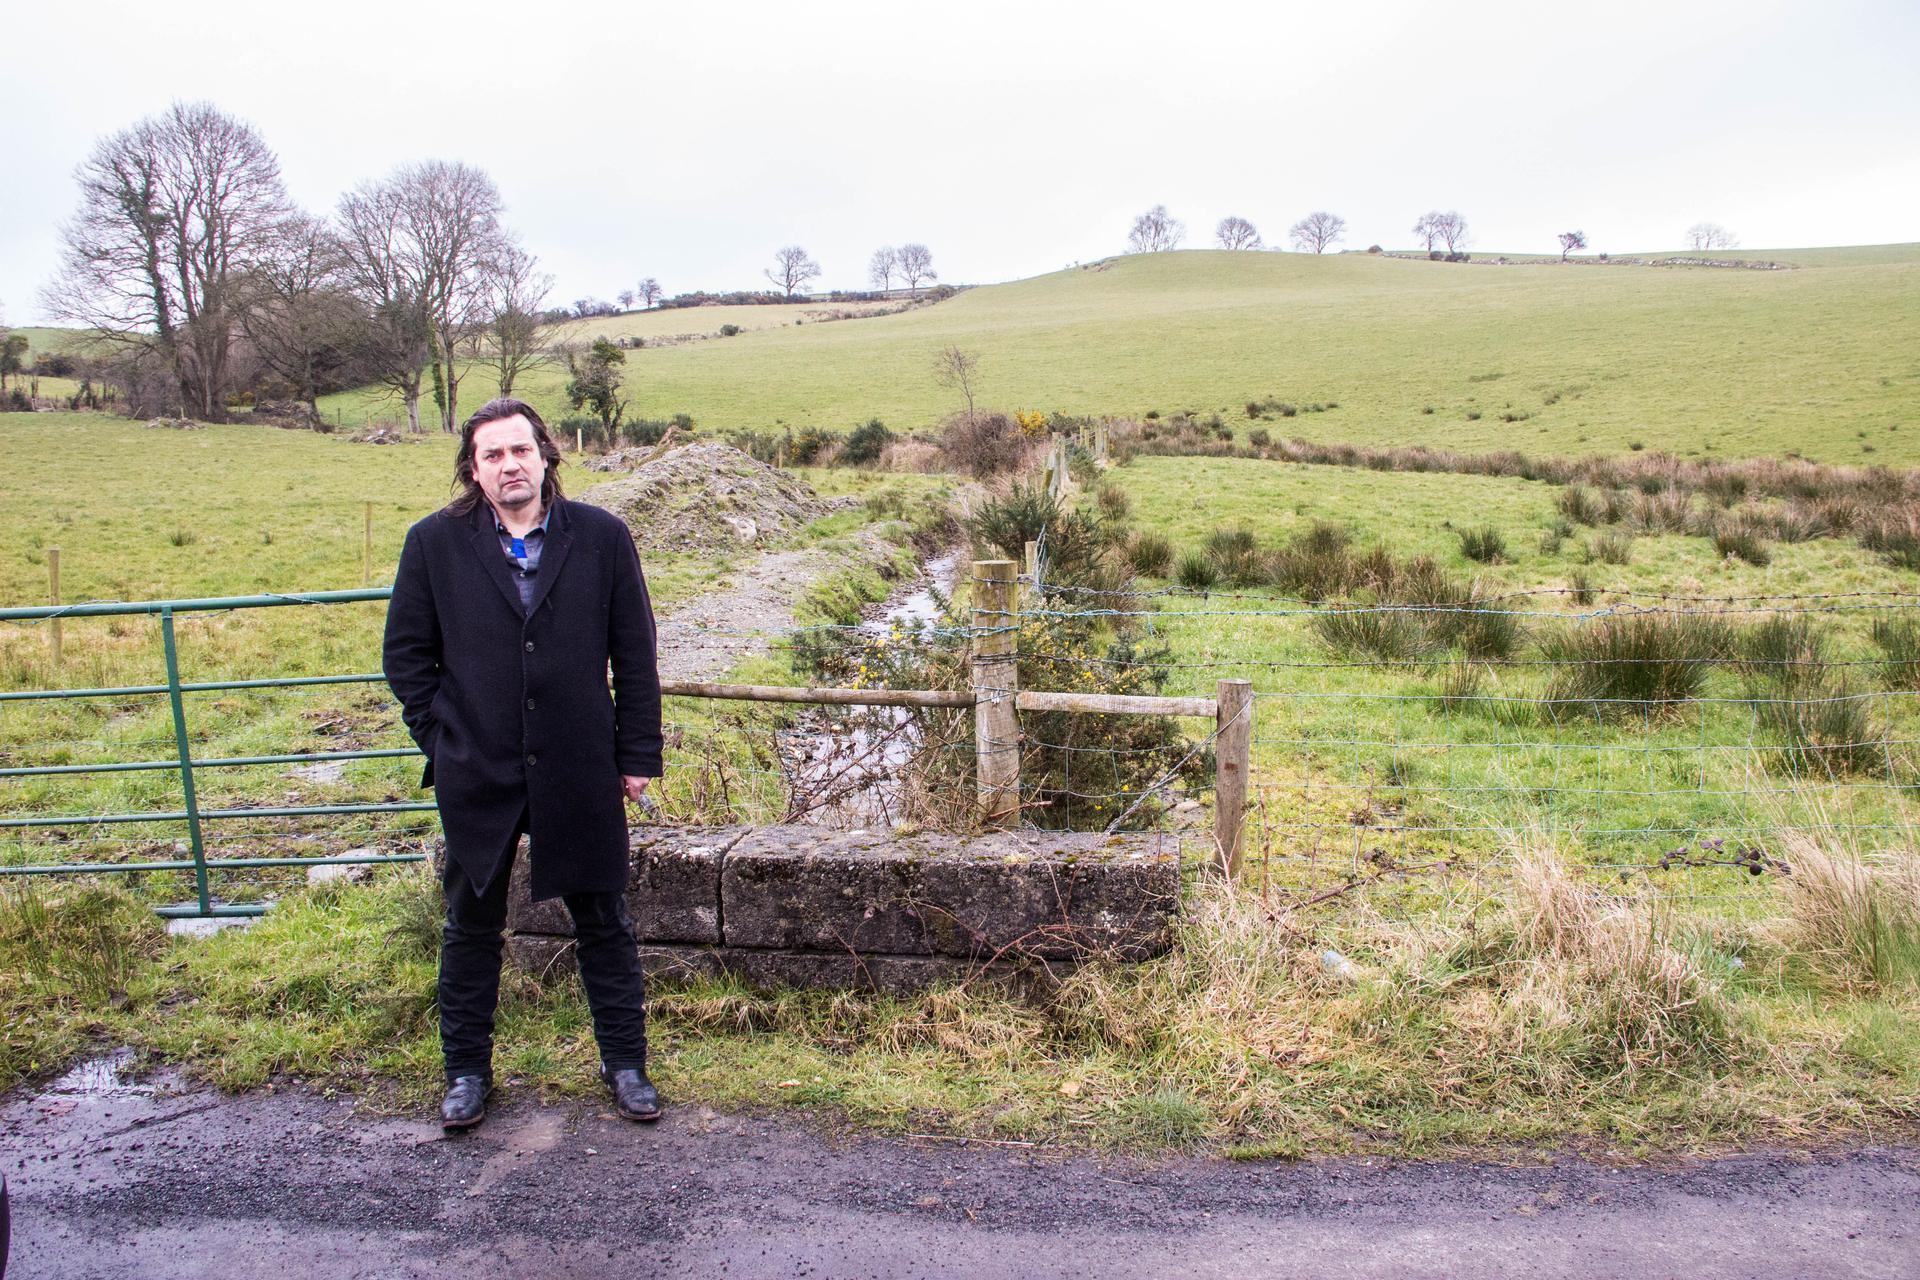 Éamonn Ó Ciardha teaches Irish language and history at Ulster University in Derry. The stream behind him marks the border between Northern Ireland and the Republic of Ireland. It's on a tiny country road just outside of Derry. Ó Ciardha says that trying t